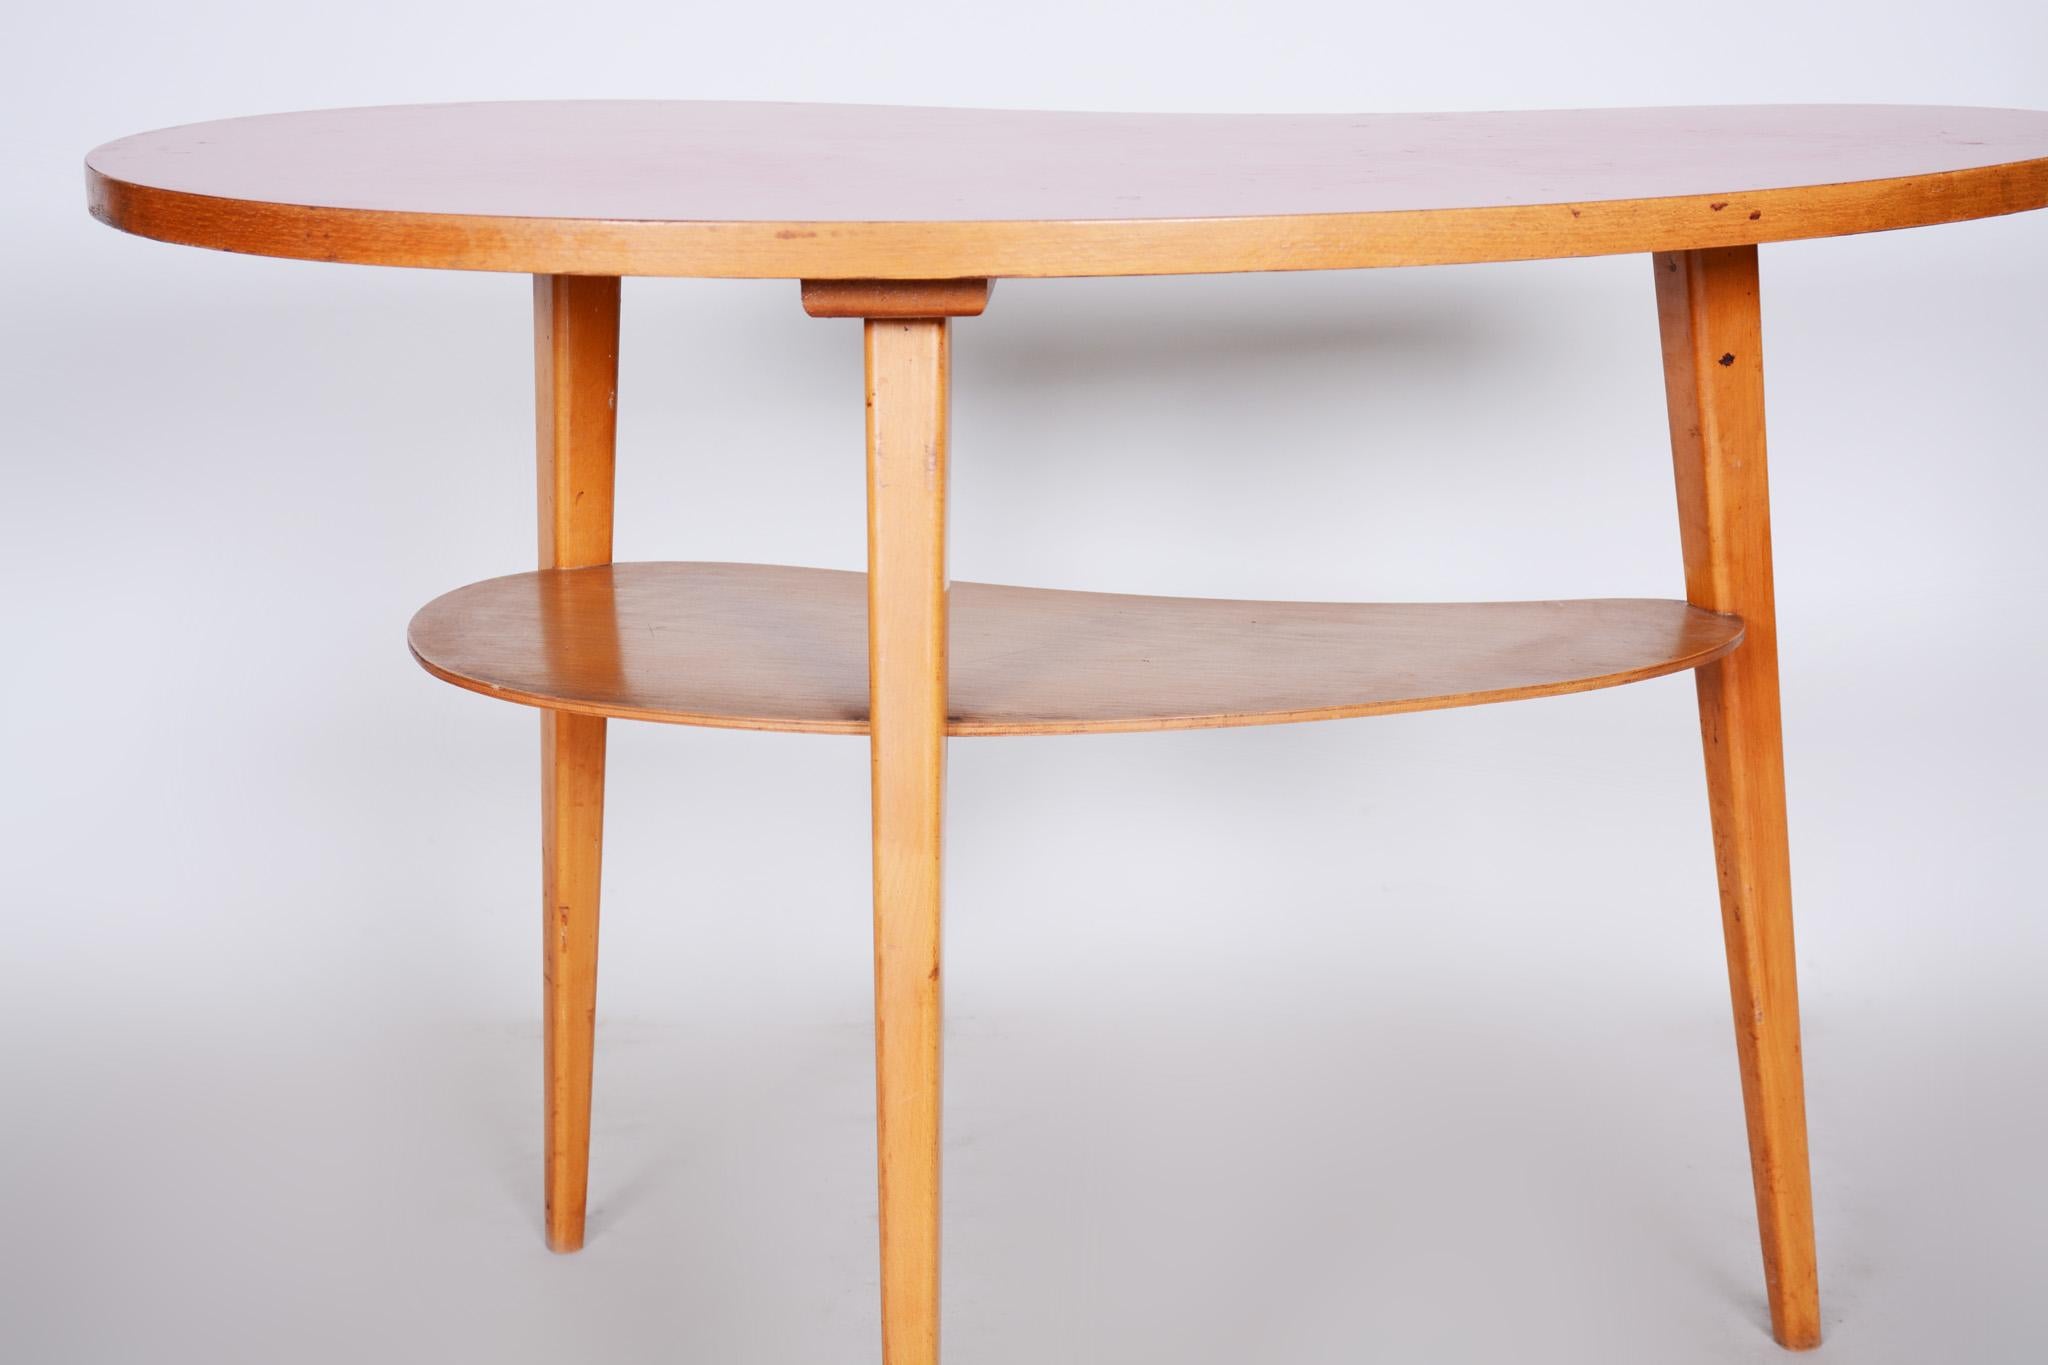 Small Beech Table, Czech Midcentury, Preserved in Original Condition, 1950s For Sale 1